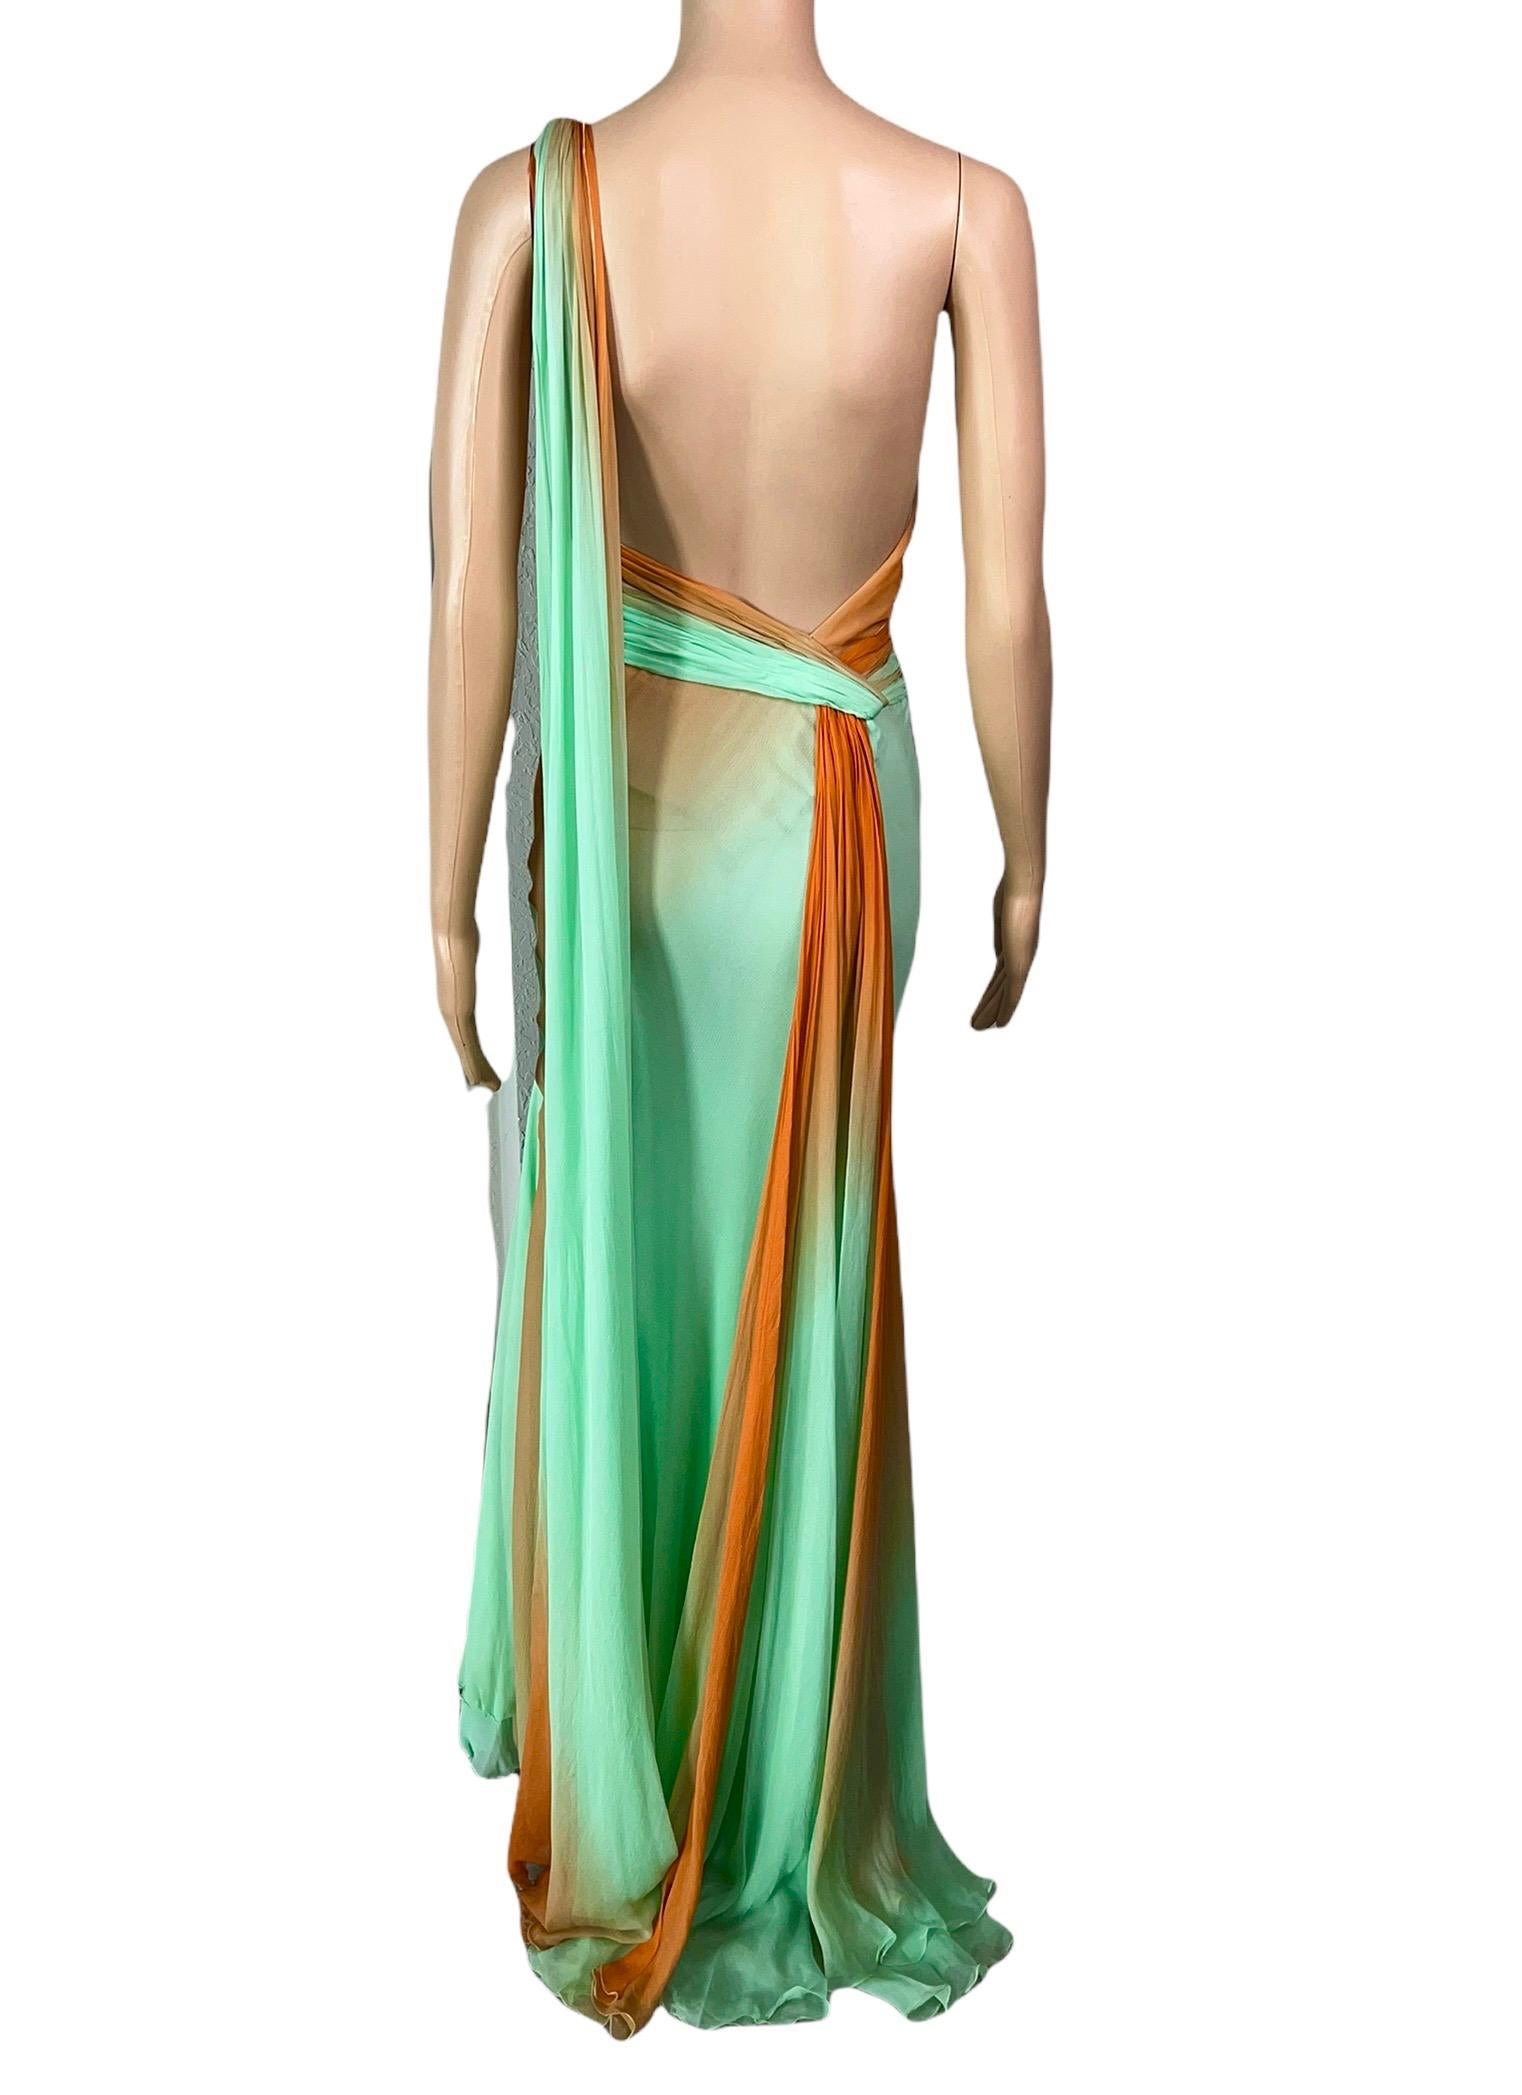 Green Versace S/S 2006 Runway One Shoulder Backless Ombre Train Evening Dress Gown